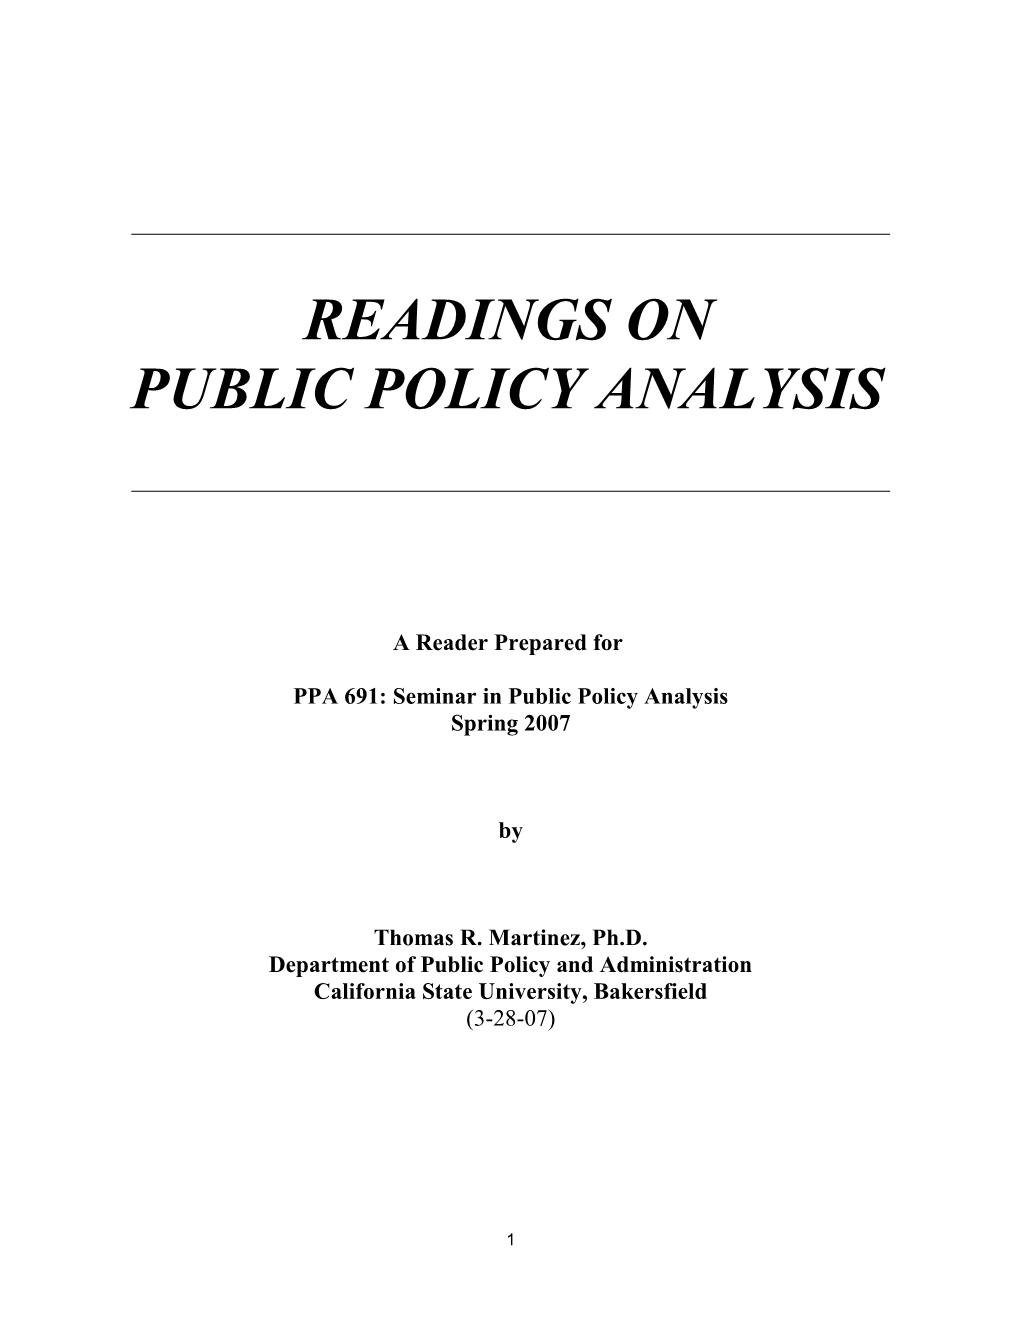 PPA 691: Seminar in Public Policy Analysis